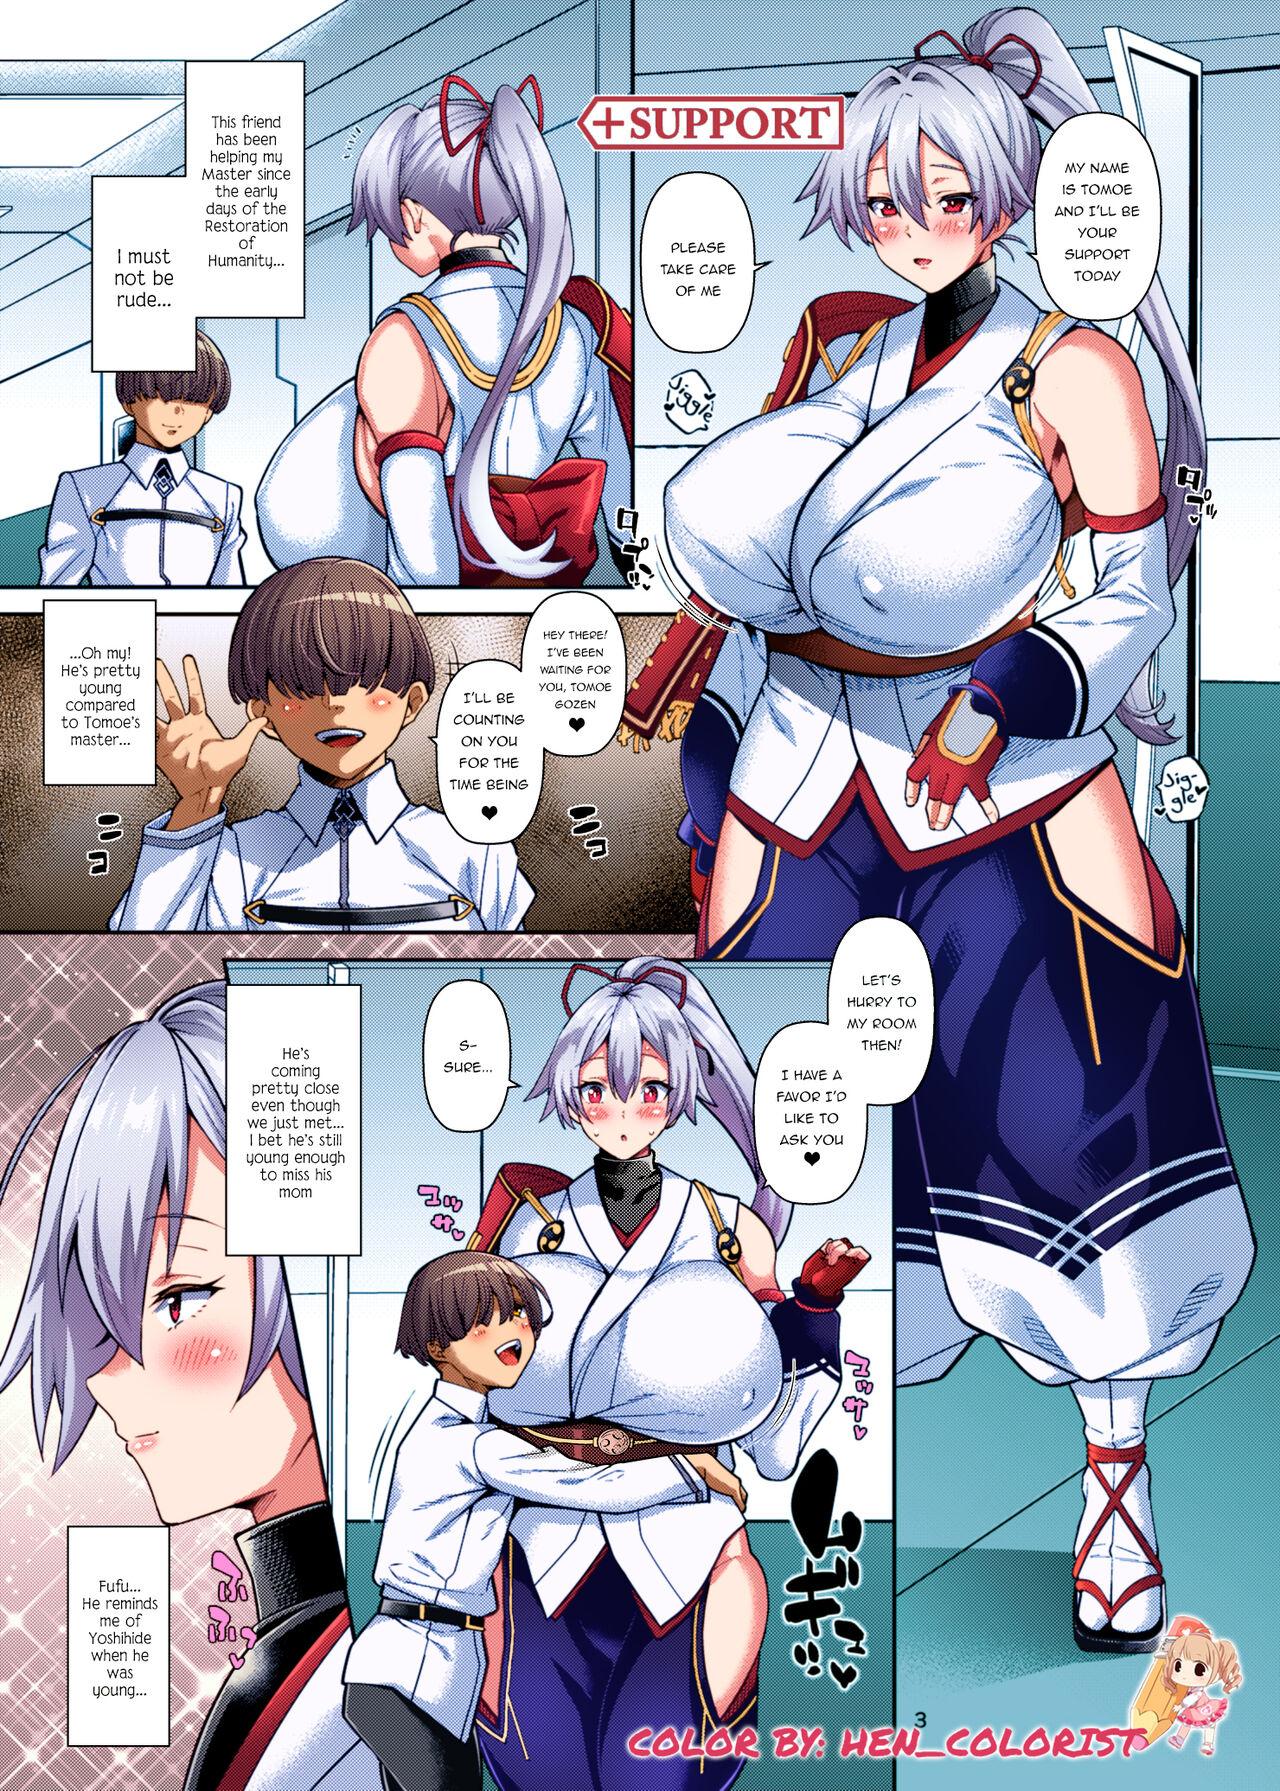 Reversecowgirl Sex Support Zupposhi Gozen - Fate grand order Sissy - Page 2